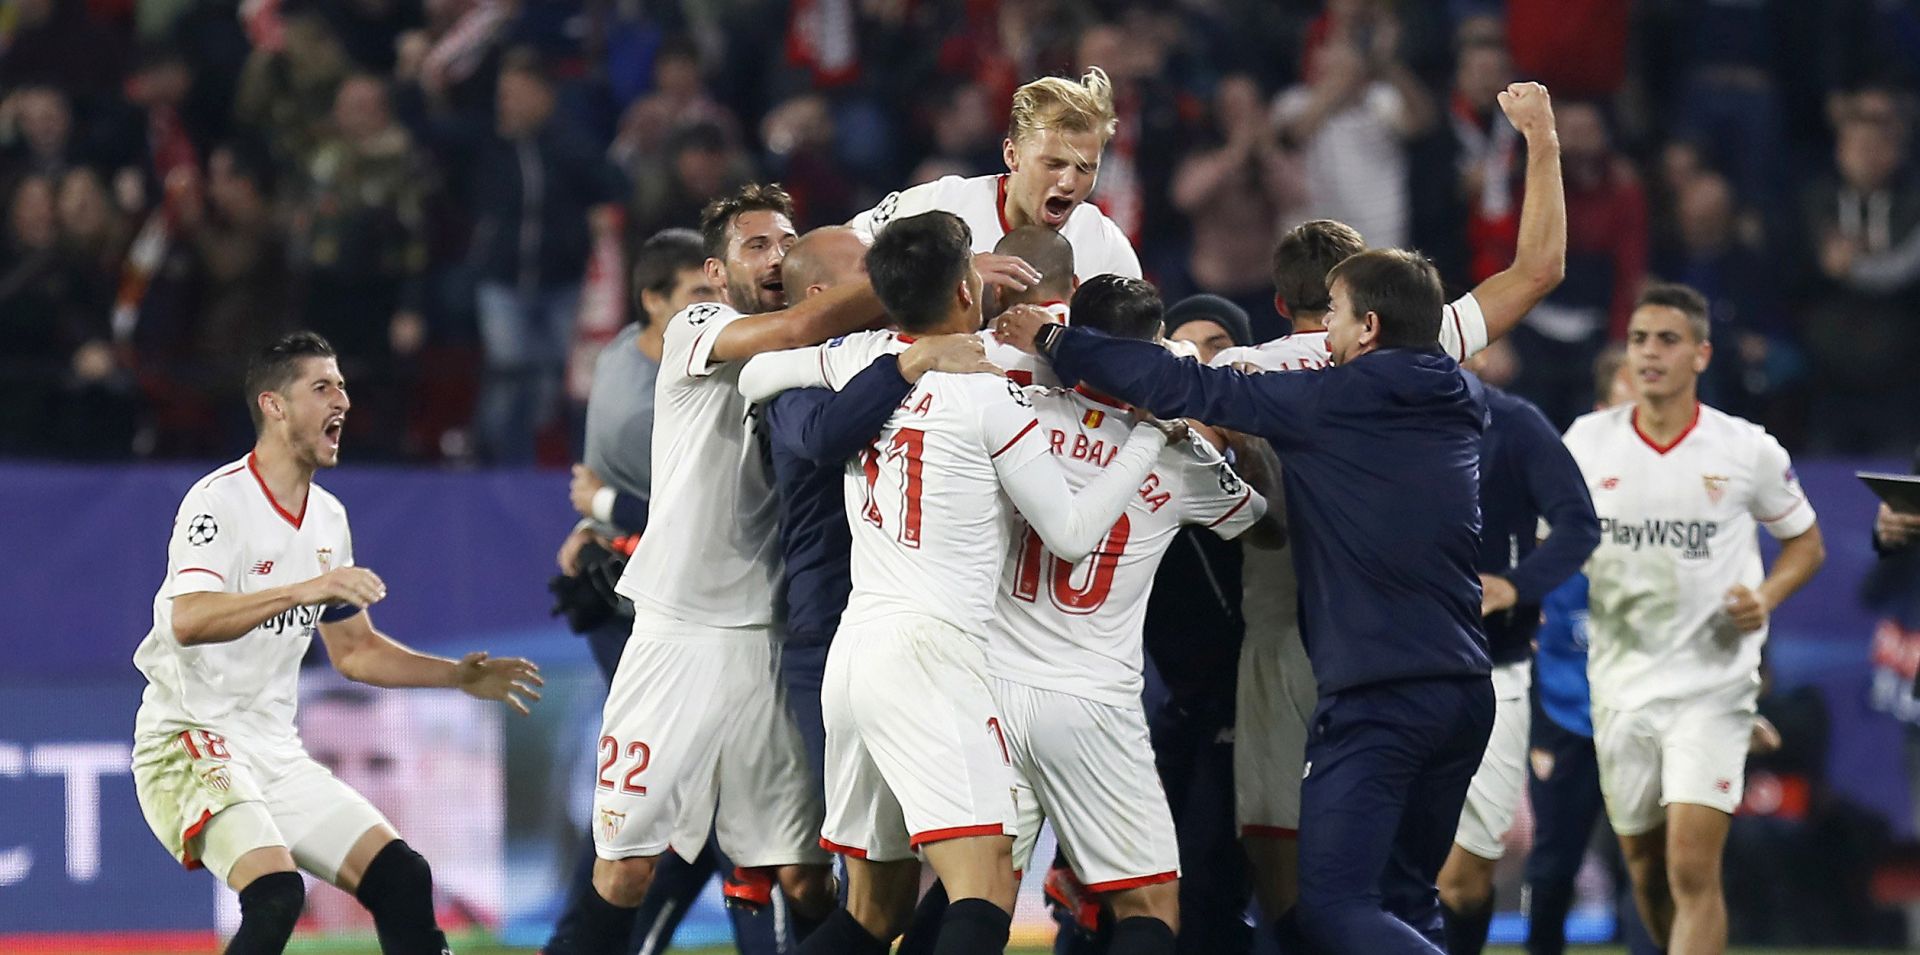 epa06343027 Sevilla's players celebrate the 3-3 equalizer during the UEFA Champions League group stage match between Sevilla FC and Liverpool FC in Seville, Spain, 21 November 2017.  EPA/JOSE MANUEL VIDAL